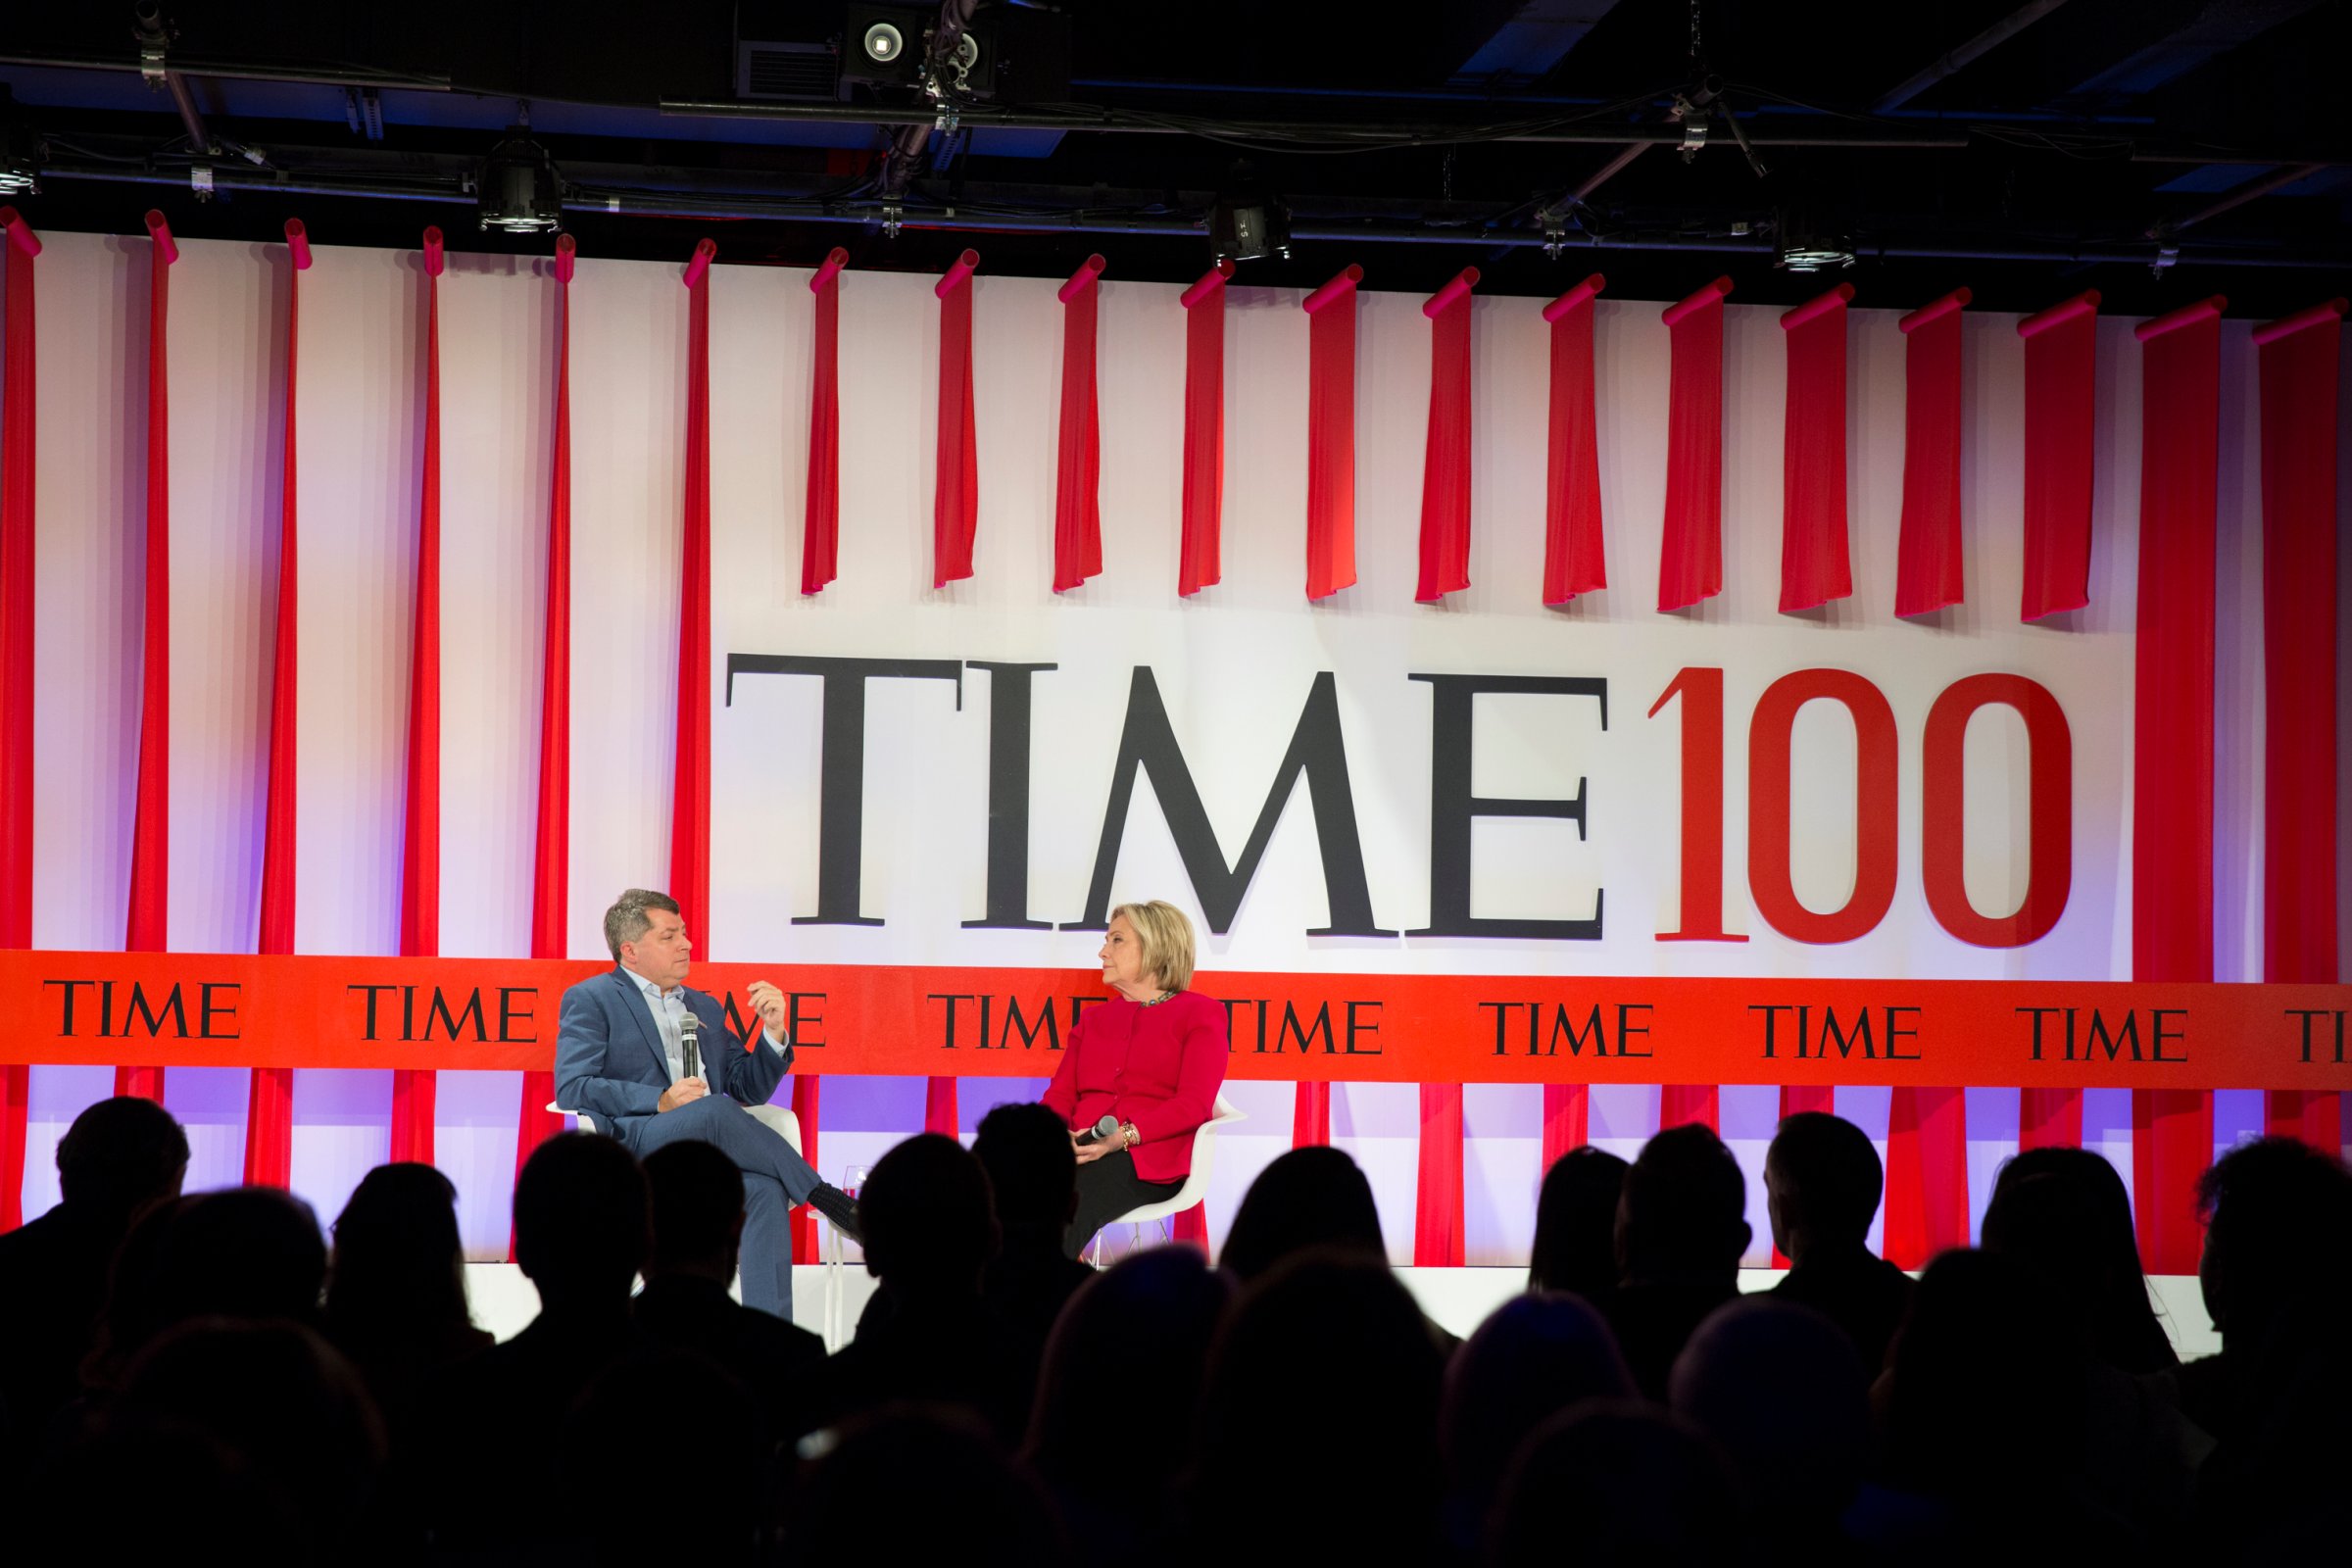 Former U.S. Secretary of State Hillary Clinton talks to Editor-in-Chief and CEO of TIME Edward Felsenthal about creating a better future  at the TIME 100 Summit in New York, on April 23, 2019.